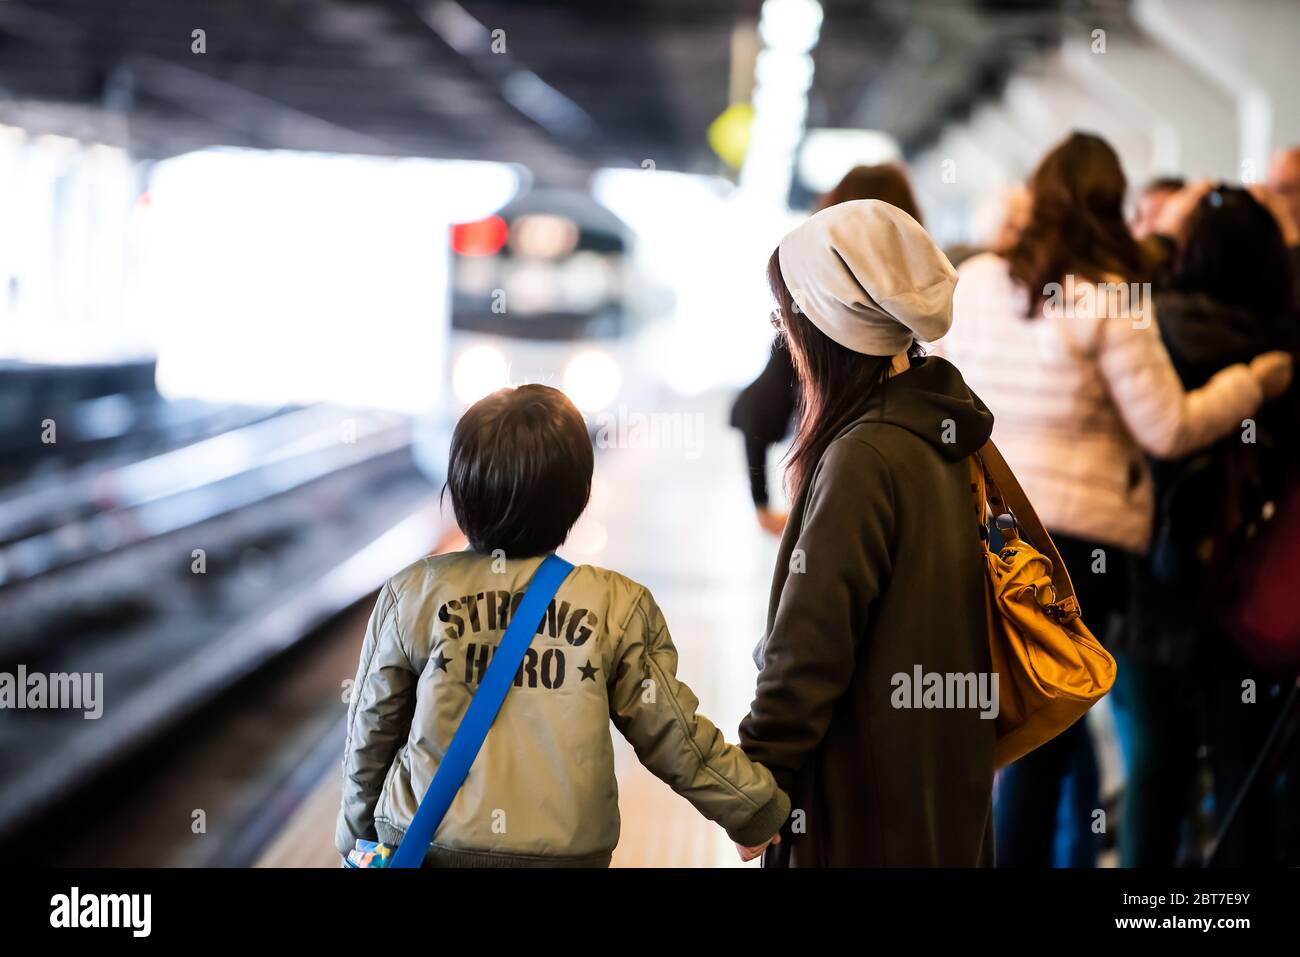 Utsunomiya, Japan - April 5, 2019: JR Train station platform local line to Nikko with mother and child local people waiting and incoming headlights Stock Photo